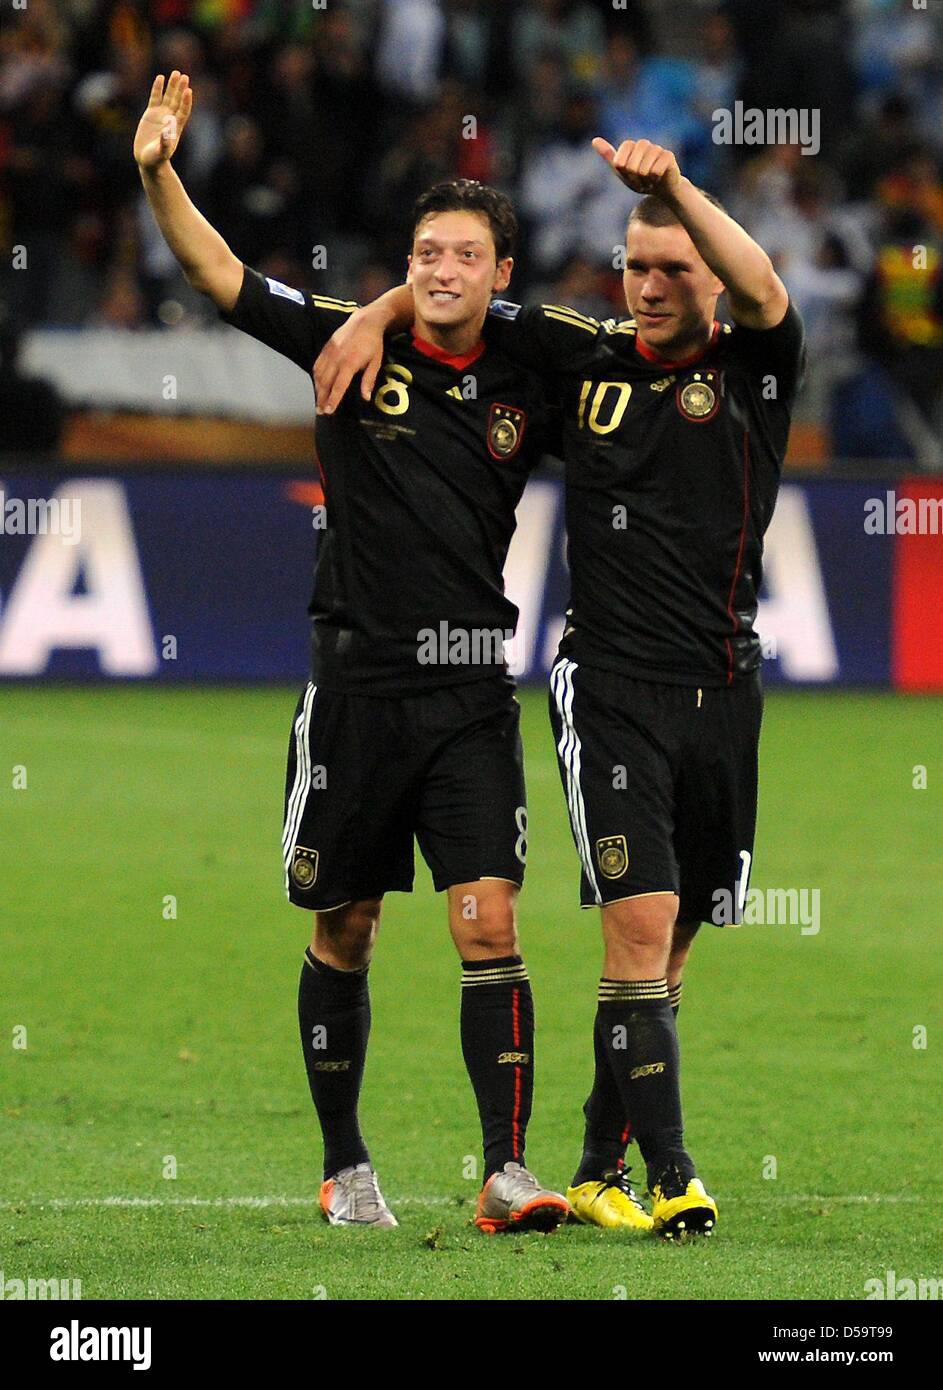 Germany's Mesut Oezil (L) and Lukas Podolski celebrate after the 2010 FIFA World Cup quarterfinal match between Argentina and Germany at the Green Point Stadium in Cape Town, South Africa 03 July 2010. Photo: Marcus Brandt dpa - Please refer to http://dpaq.de/FIFA-WM2010-TC Stock Photo